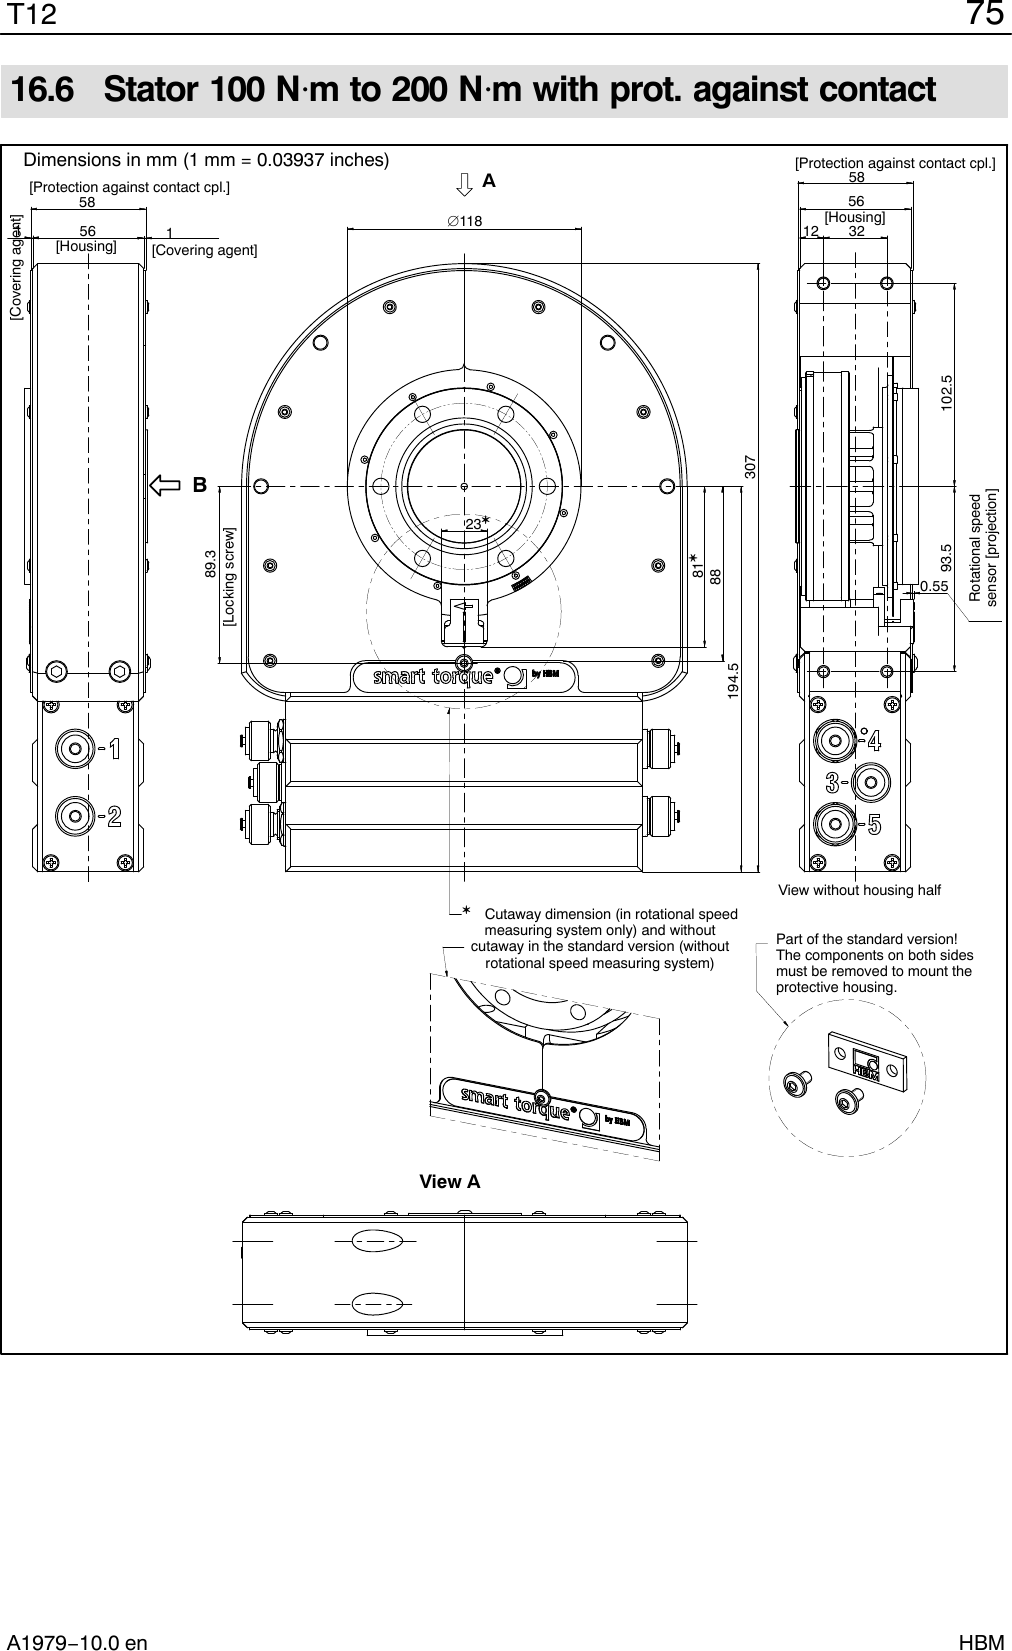 75T12A1979−10.0 en HBM16.6  Stator 100 Nm to 200 Nm with prot. against contact Cutaway dimension (in rotational speedmeasuring system only) and withoutcutaway in the standard version (withoutrotational speed measuring system)Part of the standard version!The components on both sidesmust be removed to mount theprotective housing.Rotational speedsensor [projection][Housing]1[Covering agent]1[Covering agent]58[Protection against contact cpl.]56[Housing]58[Protection against contact cpl.]563212102.593.50.55View without housing half11830788194.589.3[Locking screw]8123BAView ADimensions in mm (1 mm = 0.03937 inches)